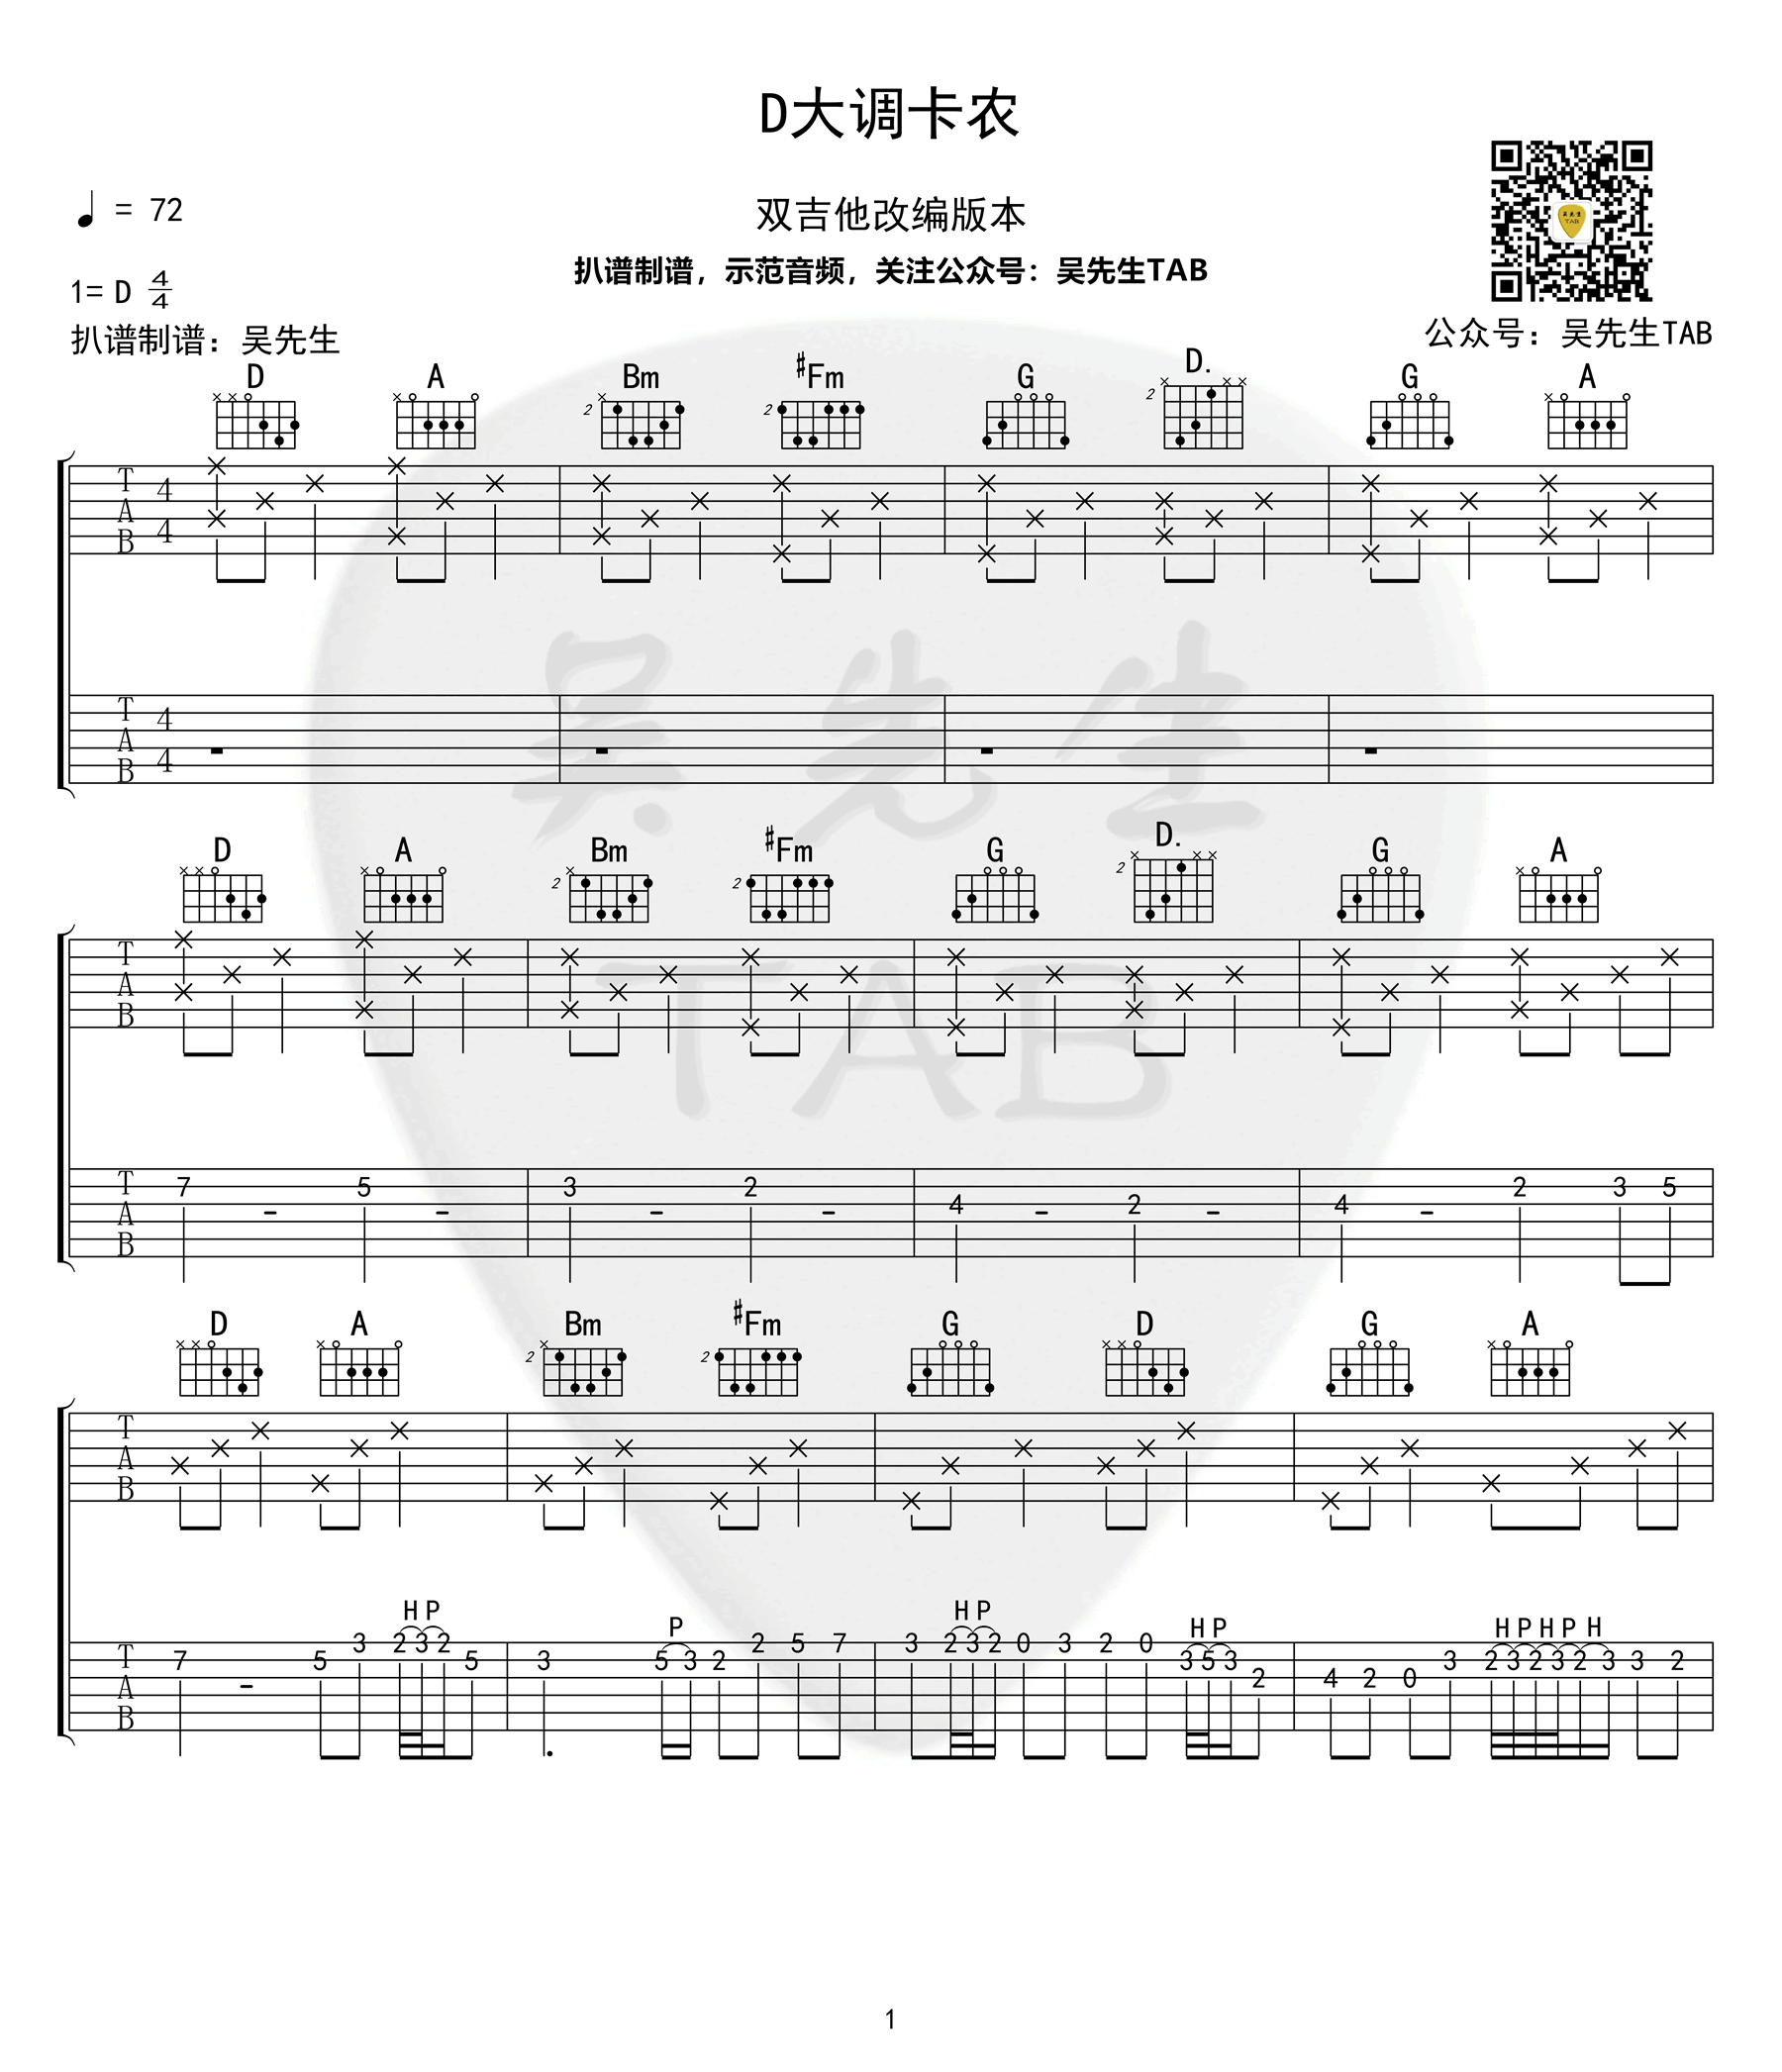 D大调卡农吉他谱-双吉他版本-Canon and Gigue in D插图